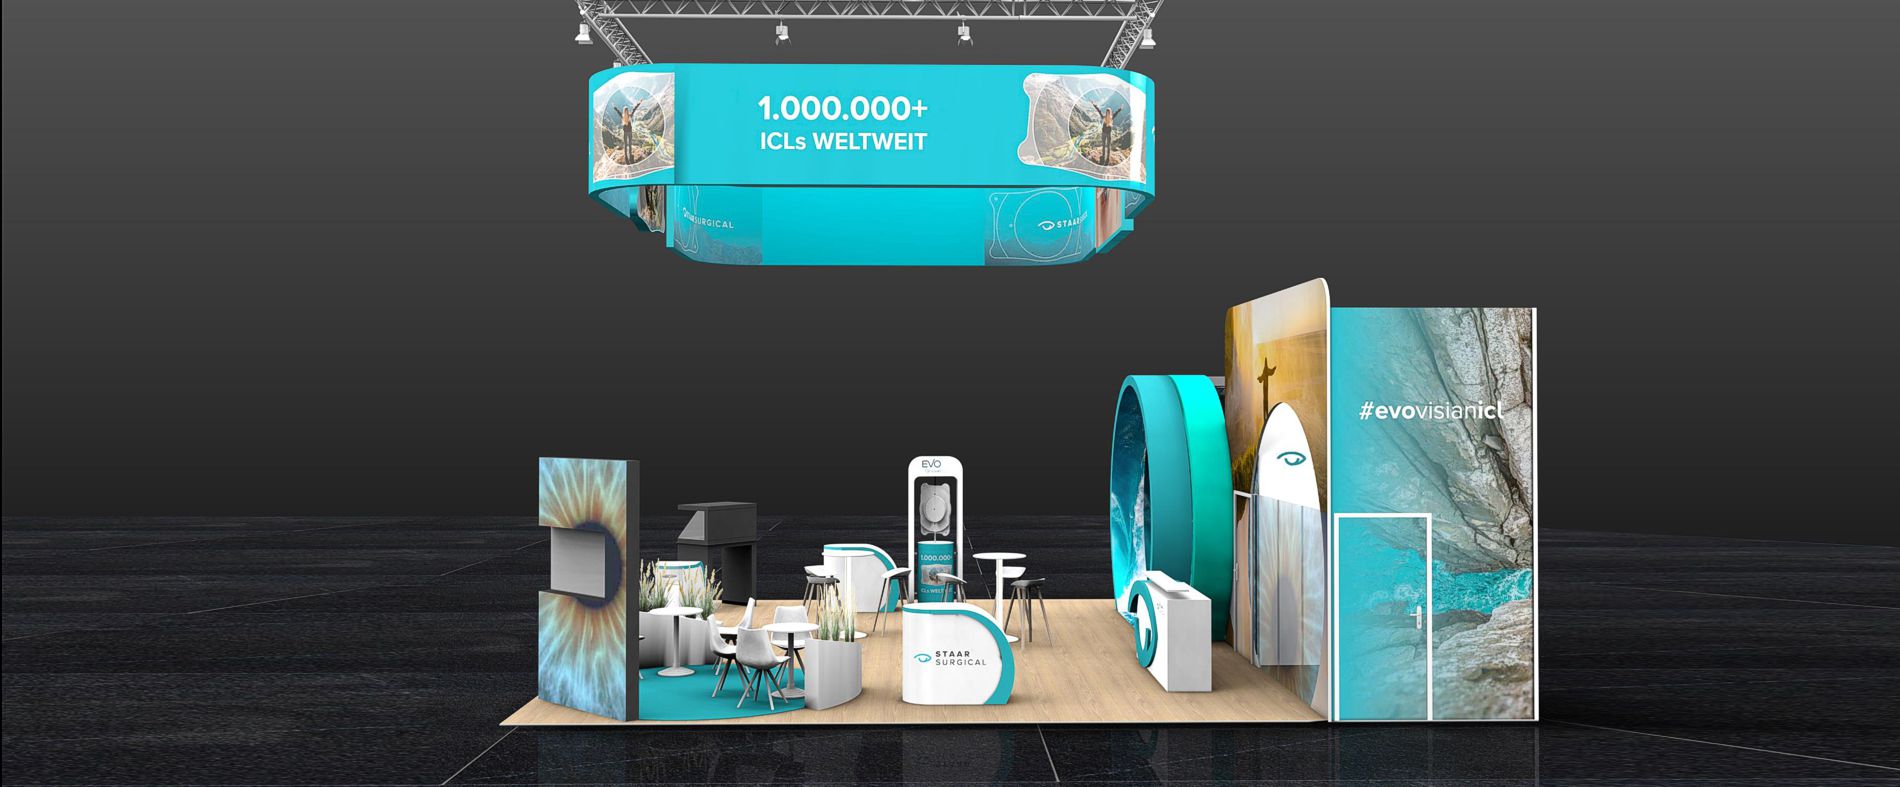 Staar Surgical Messestand